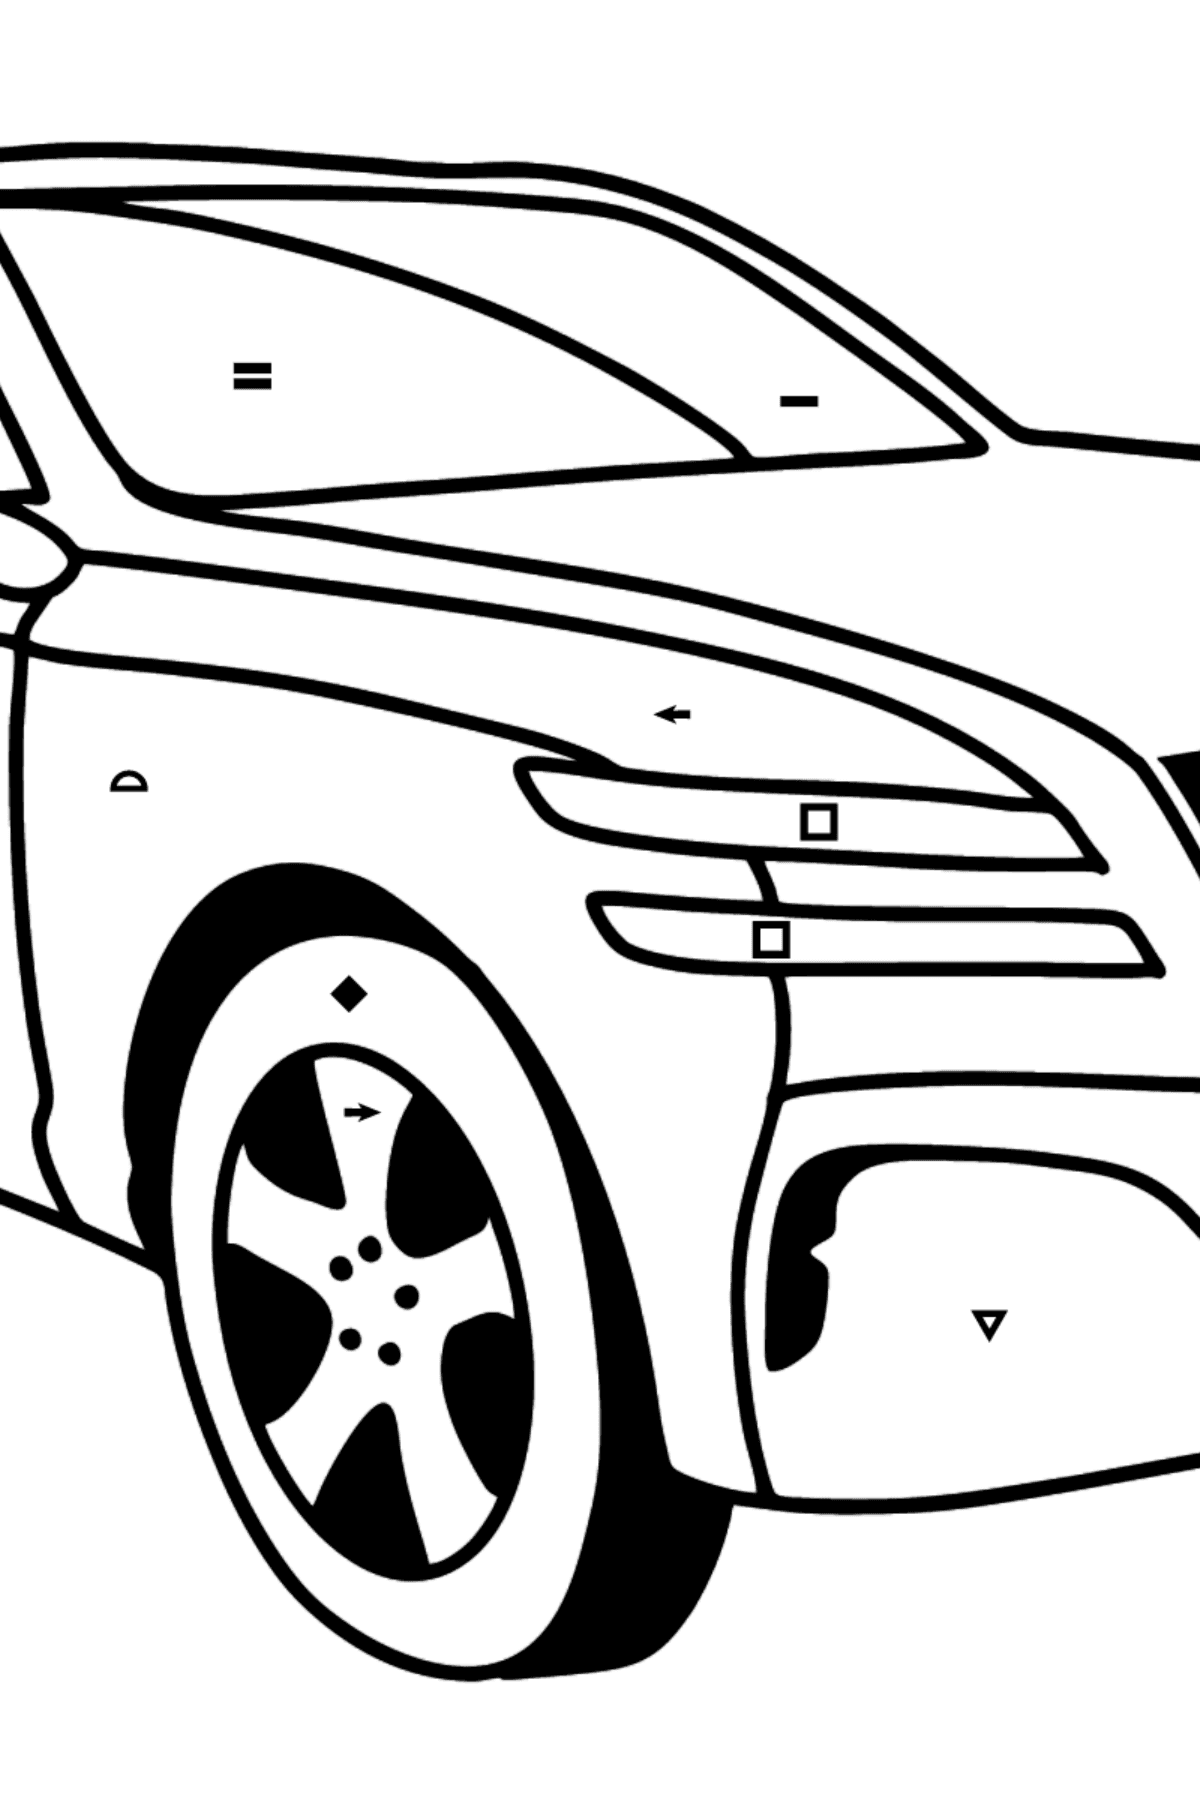 Genesis car coloring page - Coloring by Symbols and Geometric Shapes for Kids